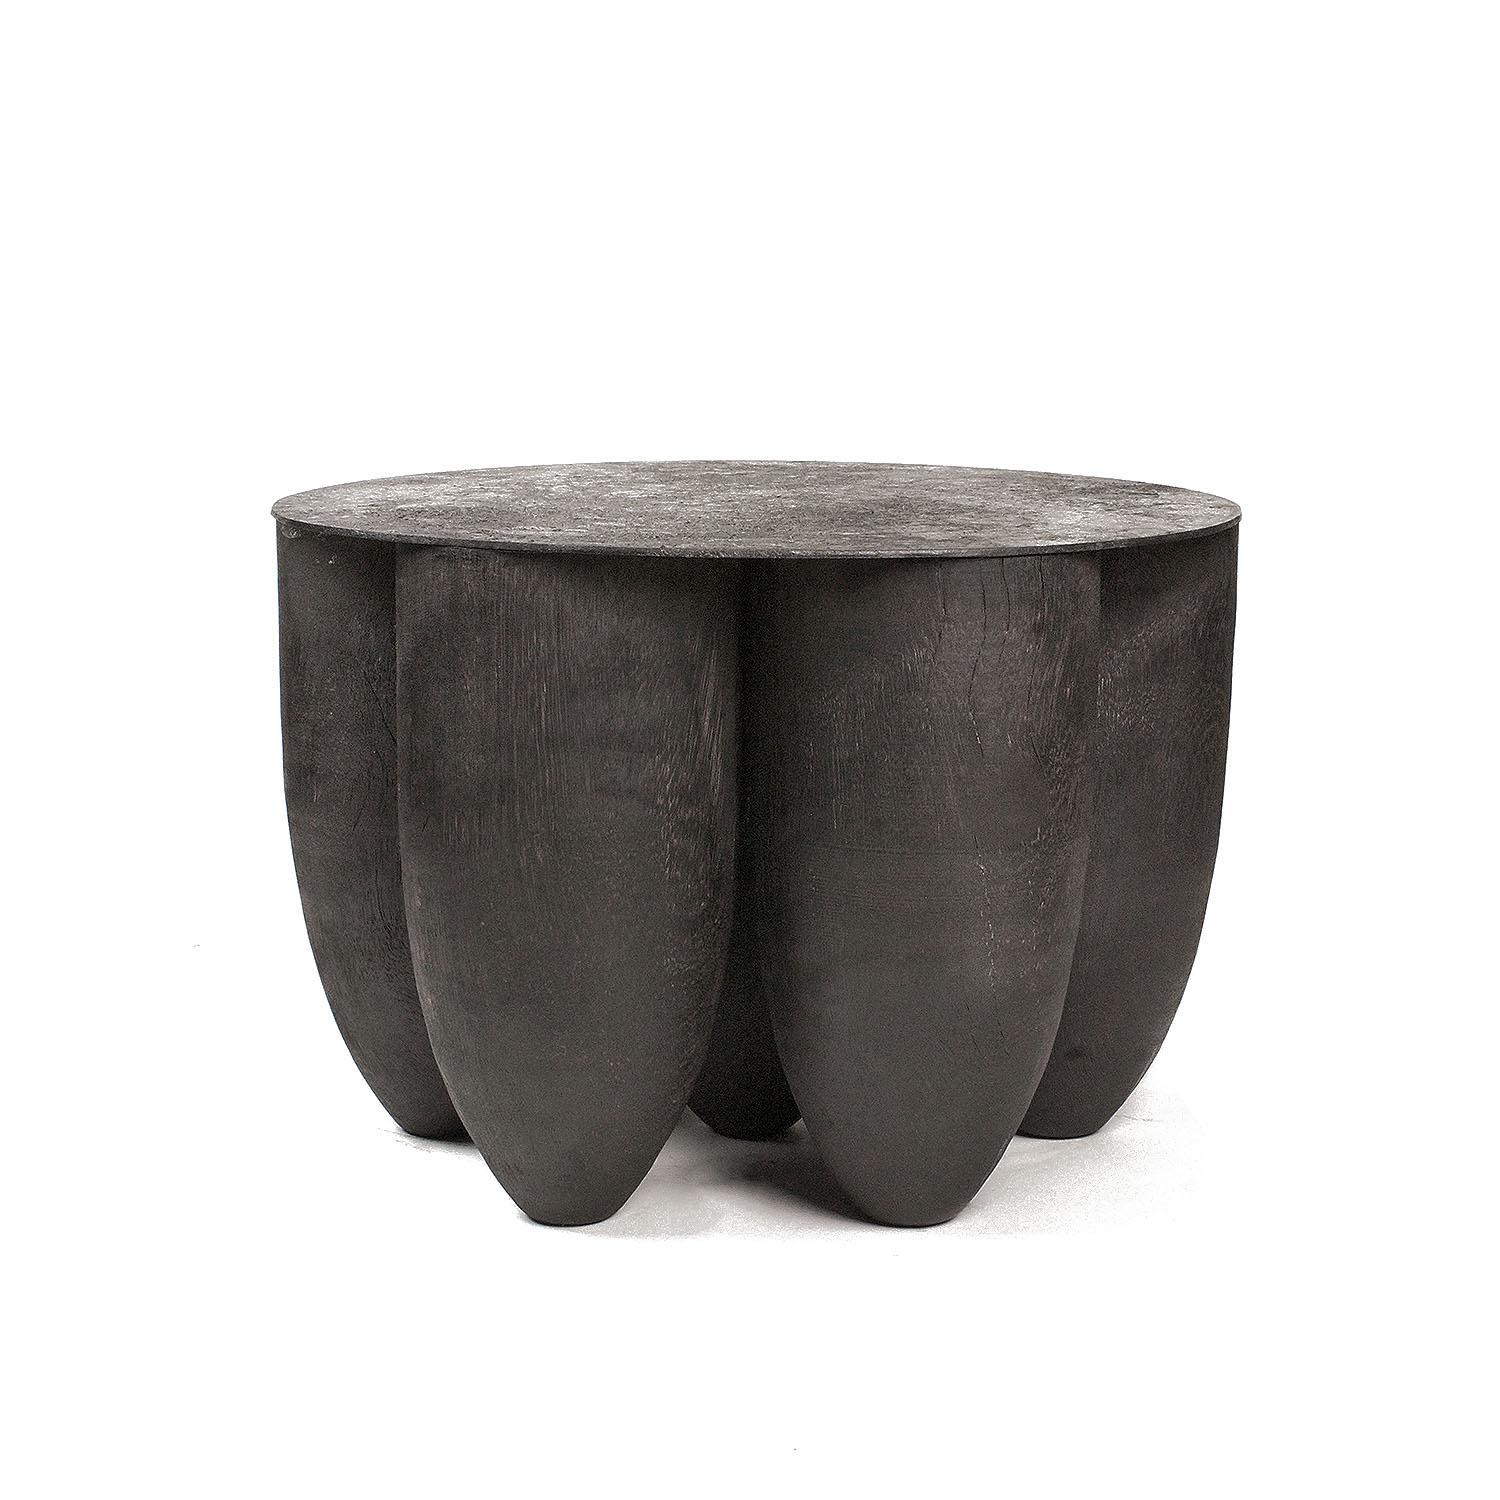 Contemporary black coffee table in iroko wood, Senufo by Arno Declercq

Material: iroko wood and burned steel
Dimensions: 45 cm L x 45 cm W x 30 cm H / 17,7” L x 17,7” W x 12” H

Made by hand, in Belgium.

Arno Declercq
Belgian designer and